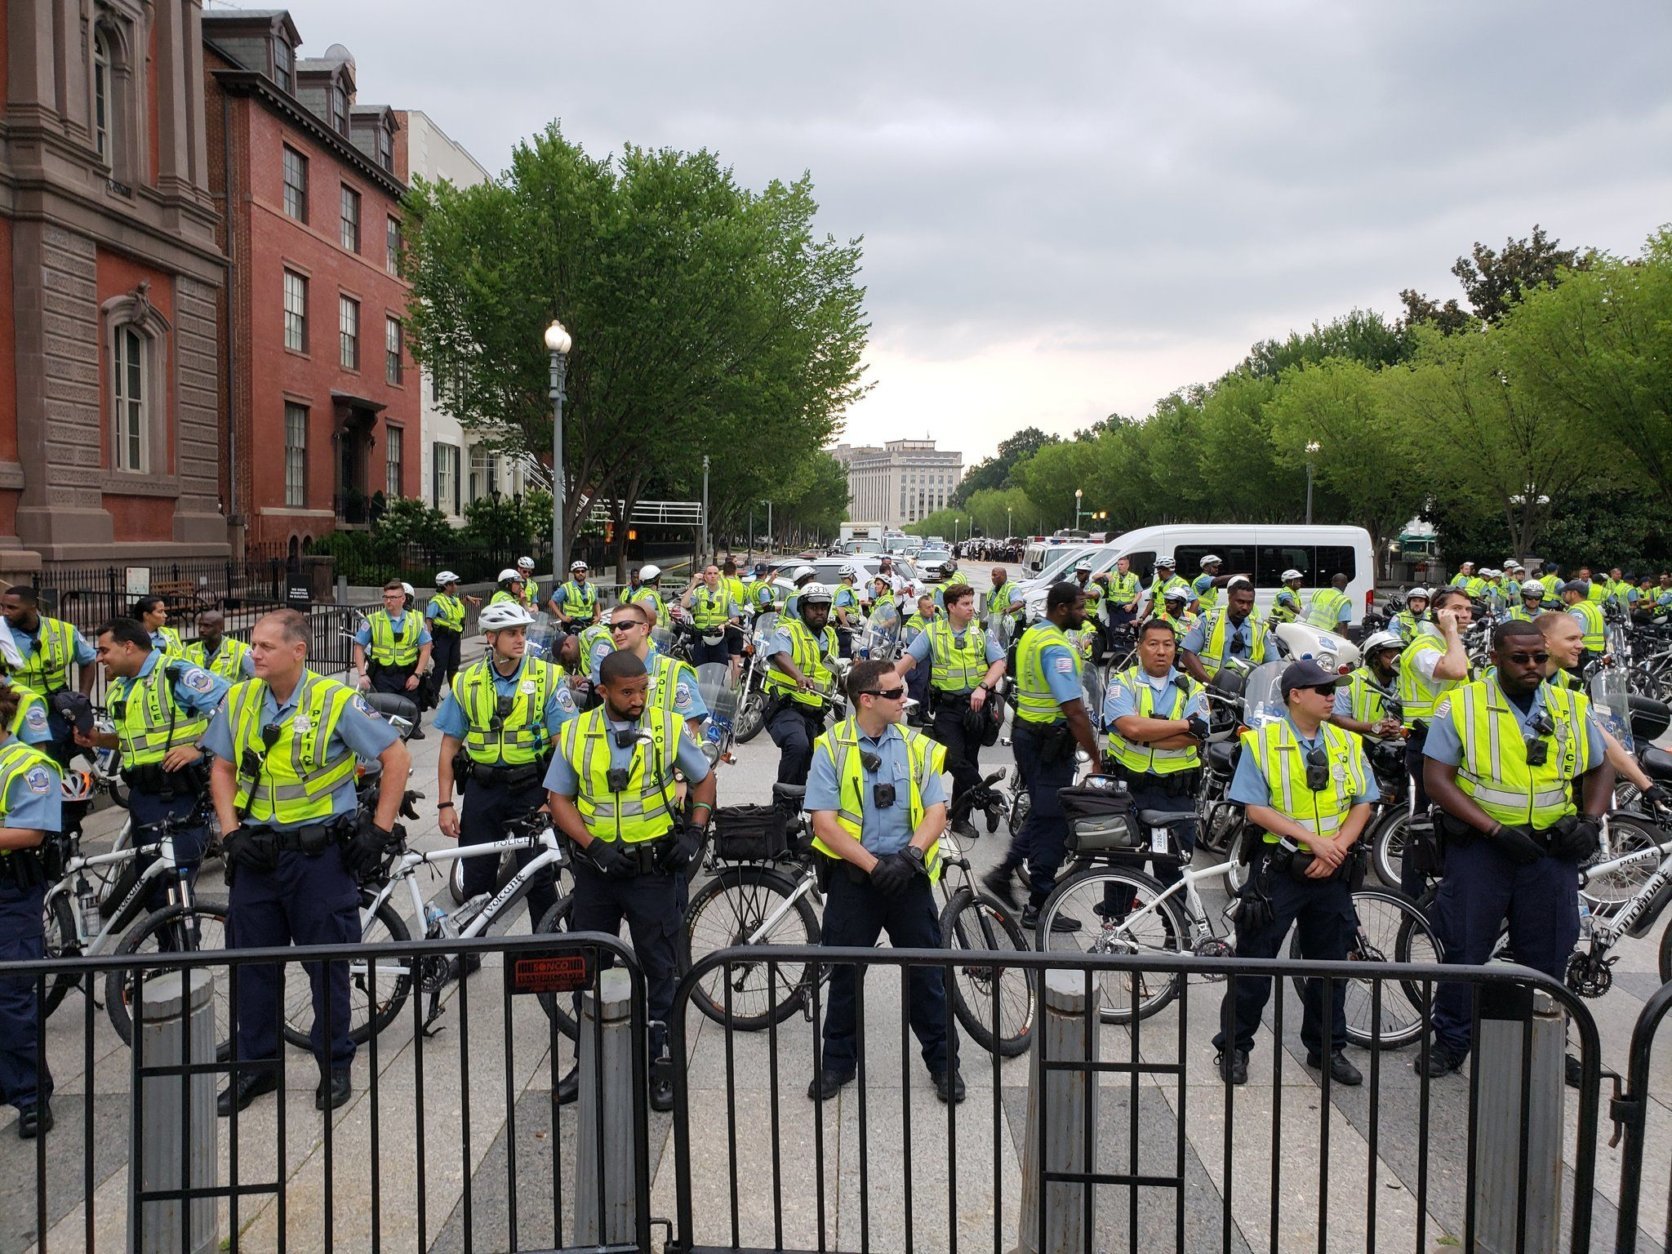 The number of police escorts for the white nationalists in D.C. far outnumbered the actual white nationalists. (Courtesy Wilson Dizard)